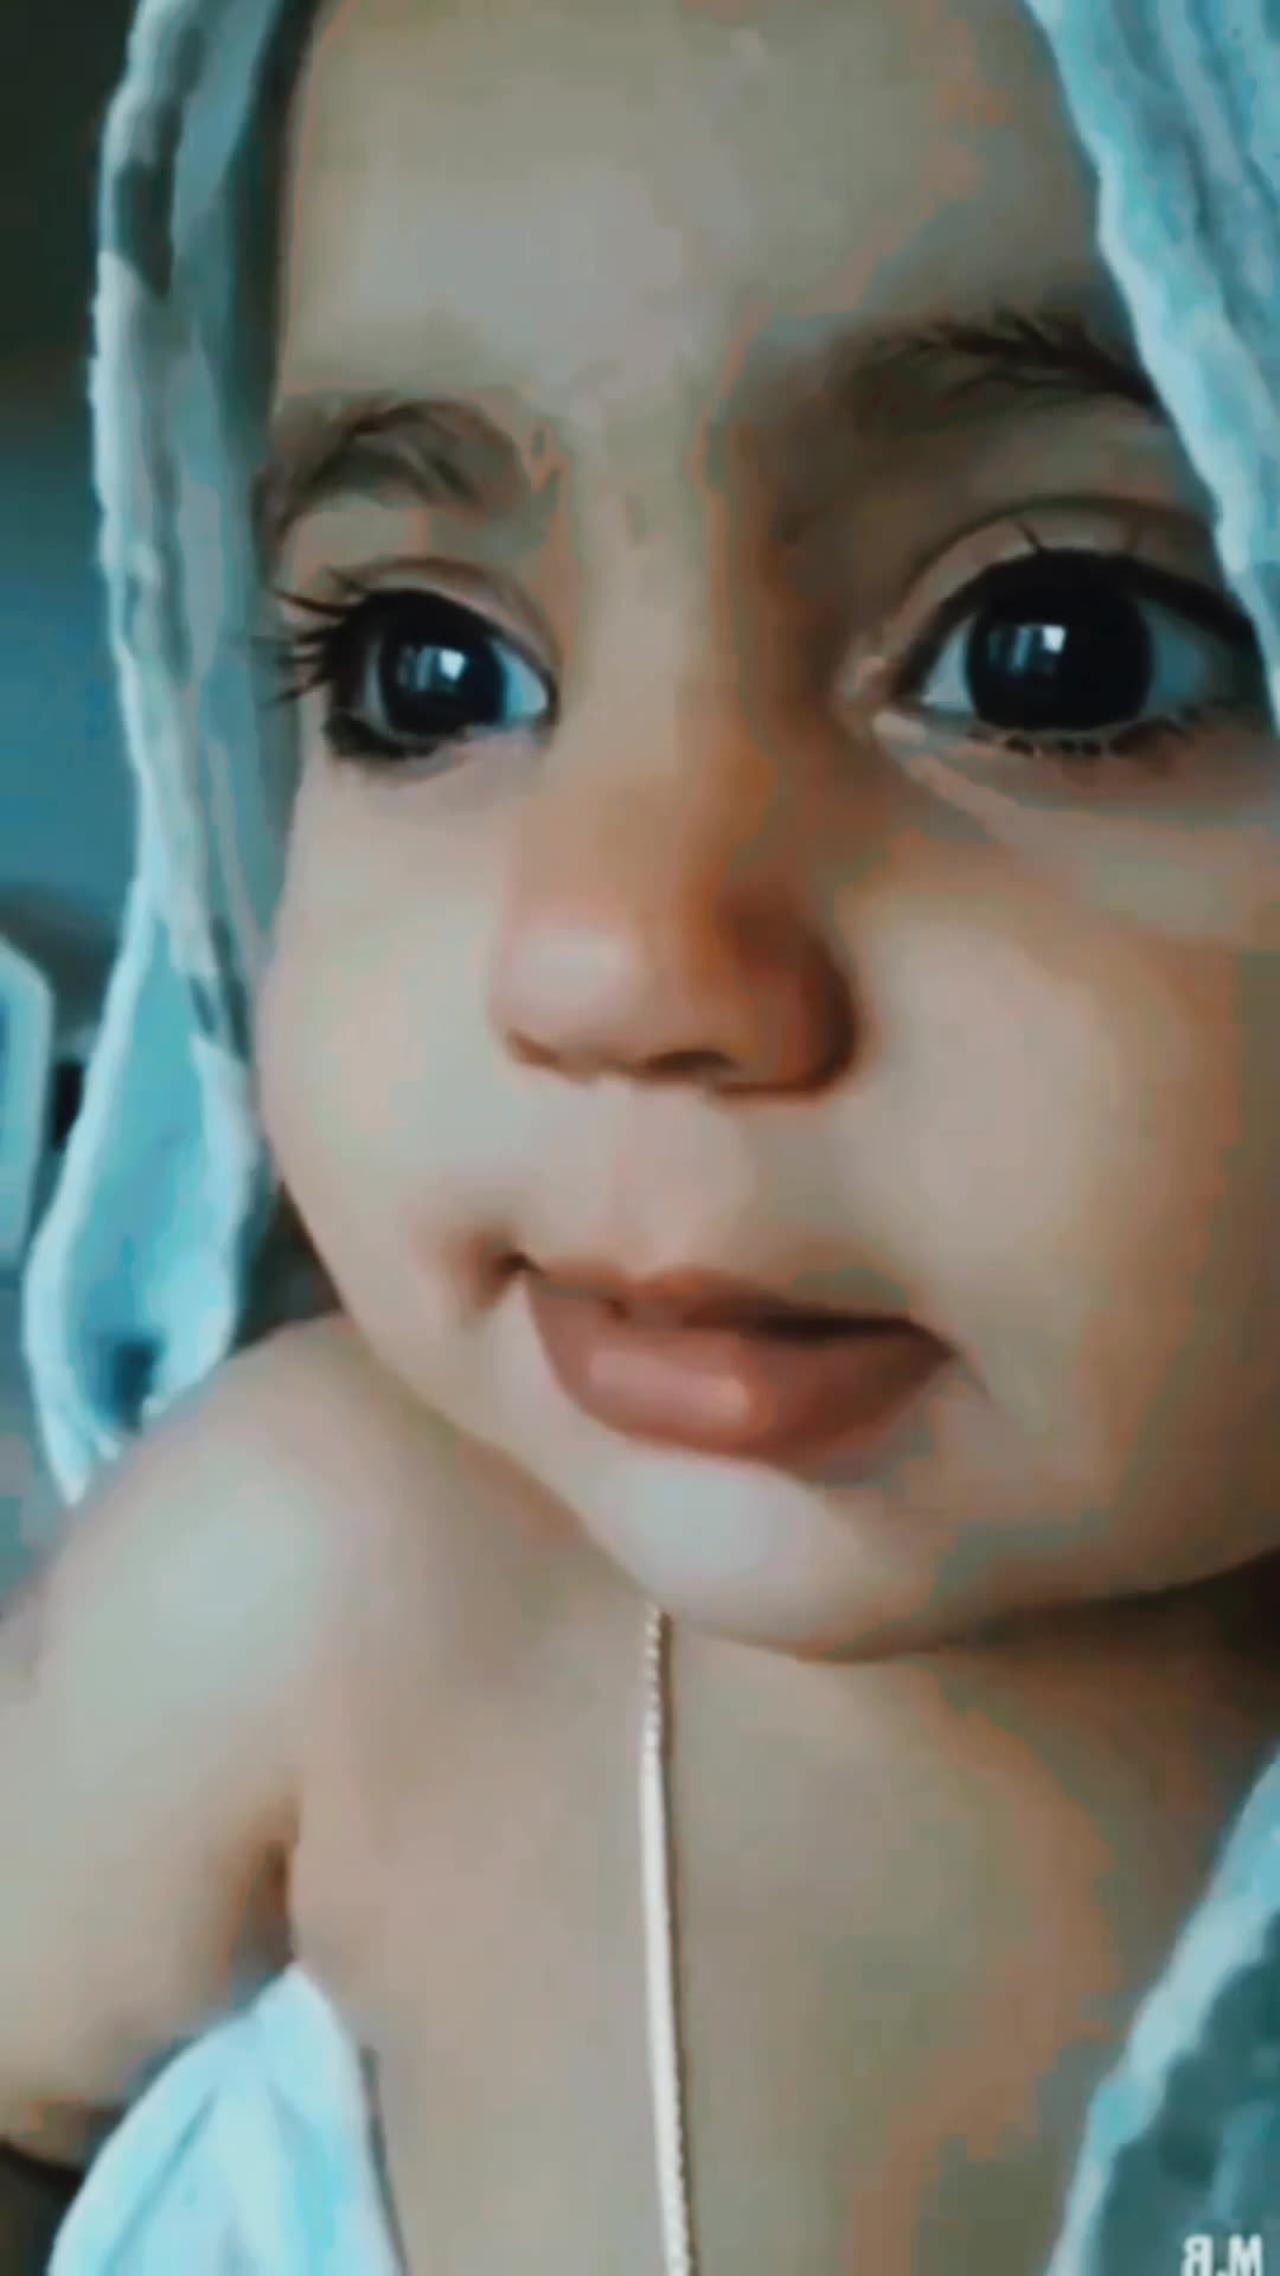 Cute Baby Feeling Cold After a Refreshing Bath - it's funny Heartwarming Moments"